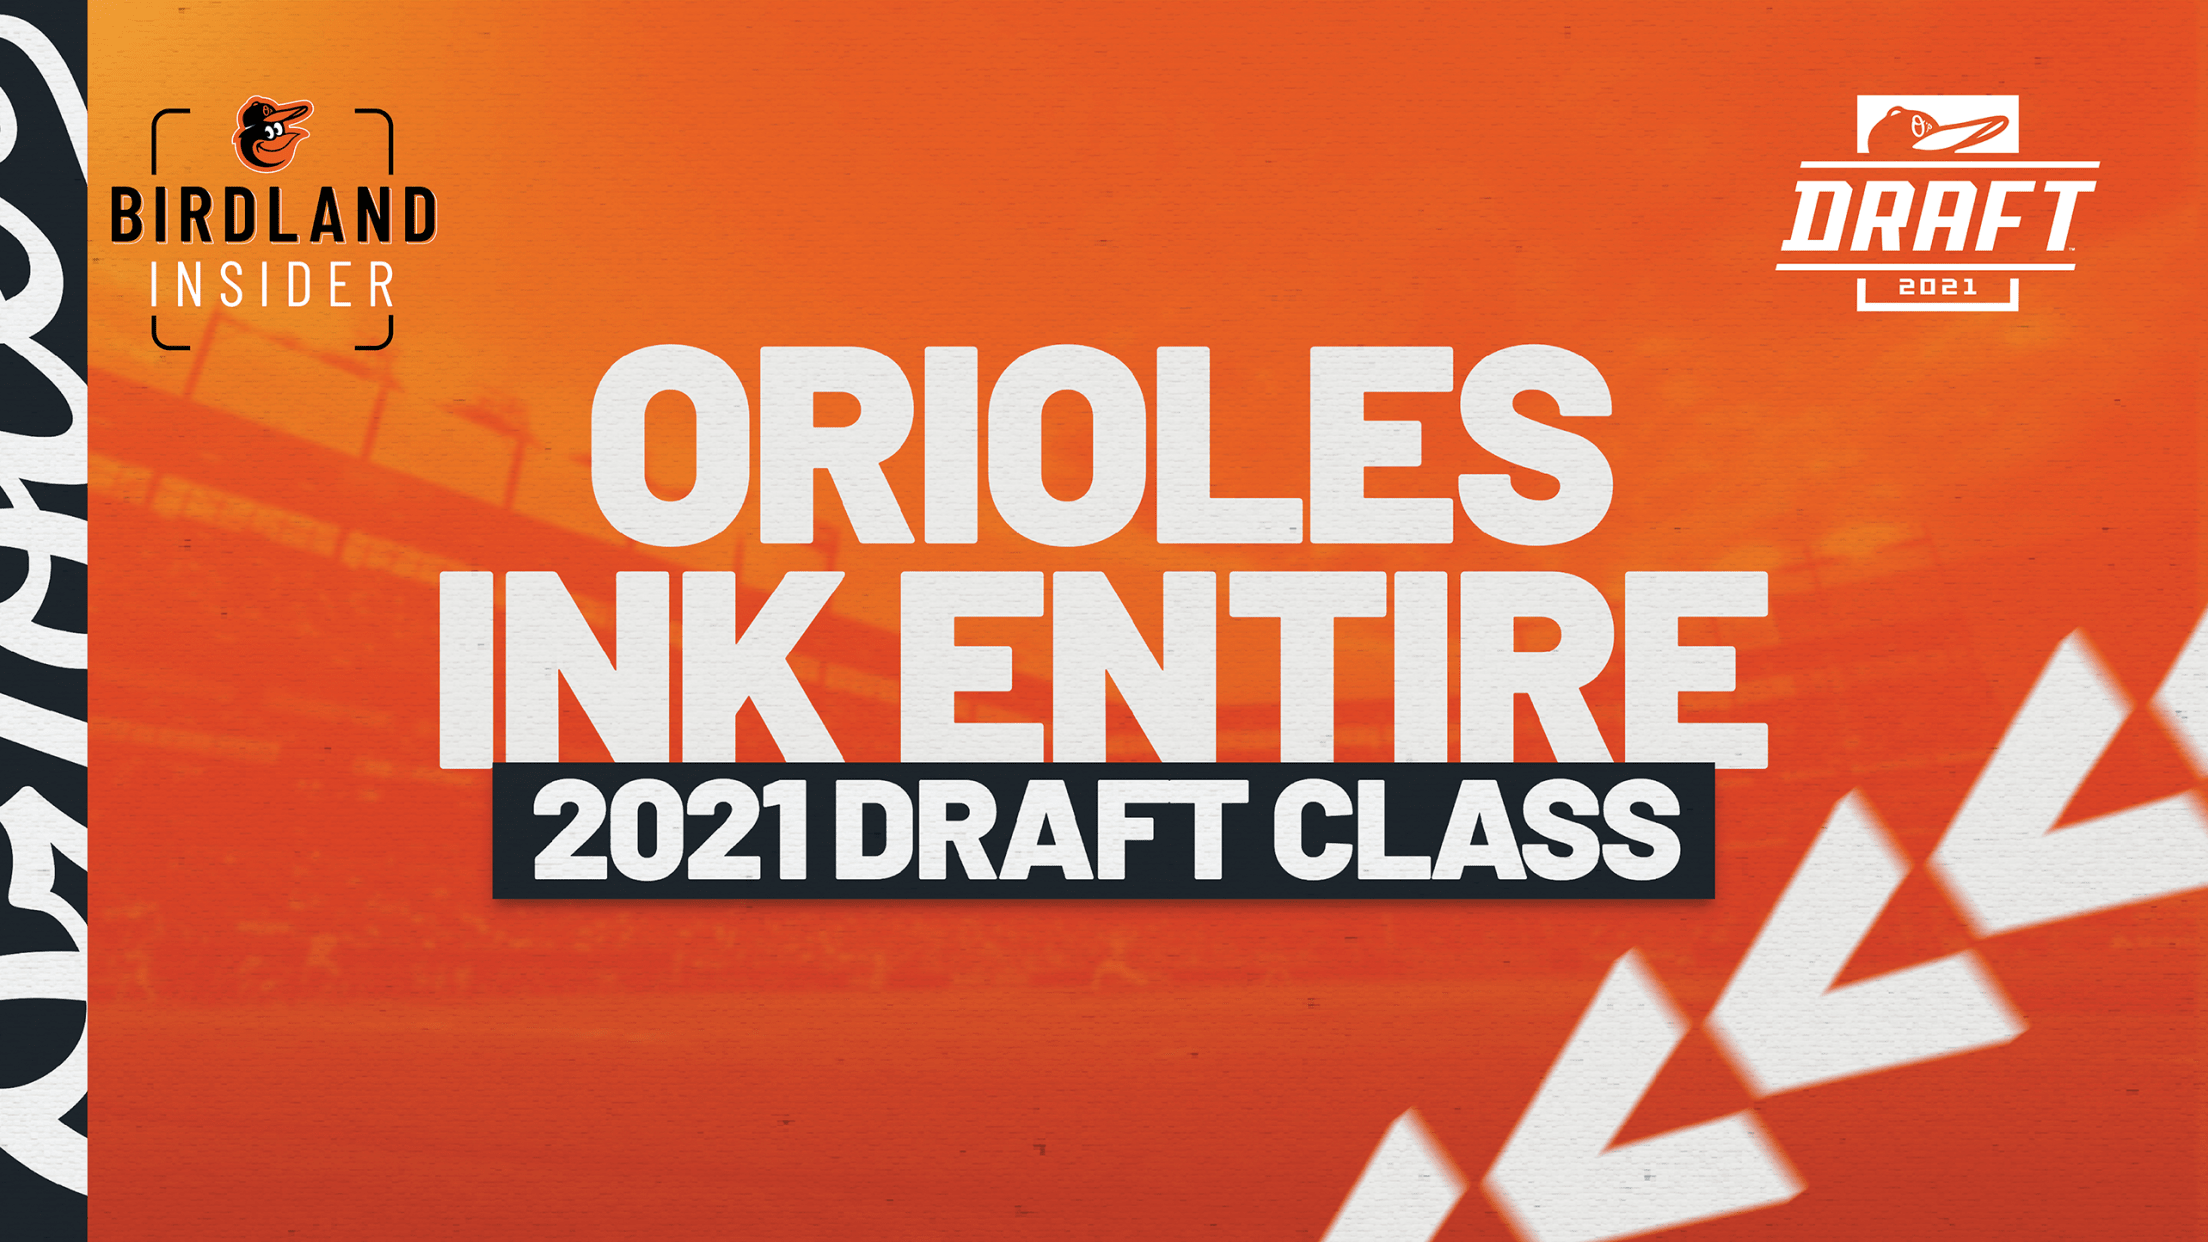 bal-orioles-ink-entire-2021-draft-class-2568x1445